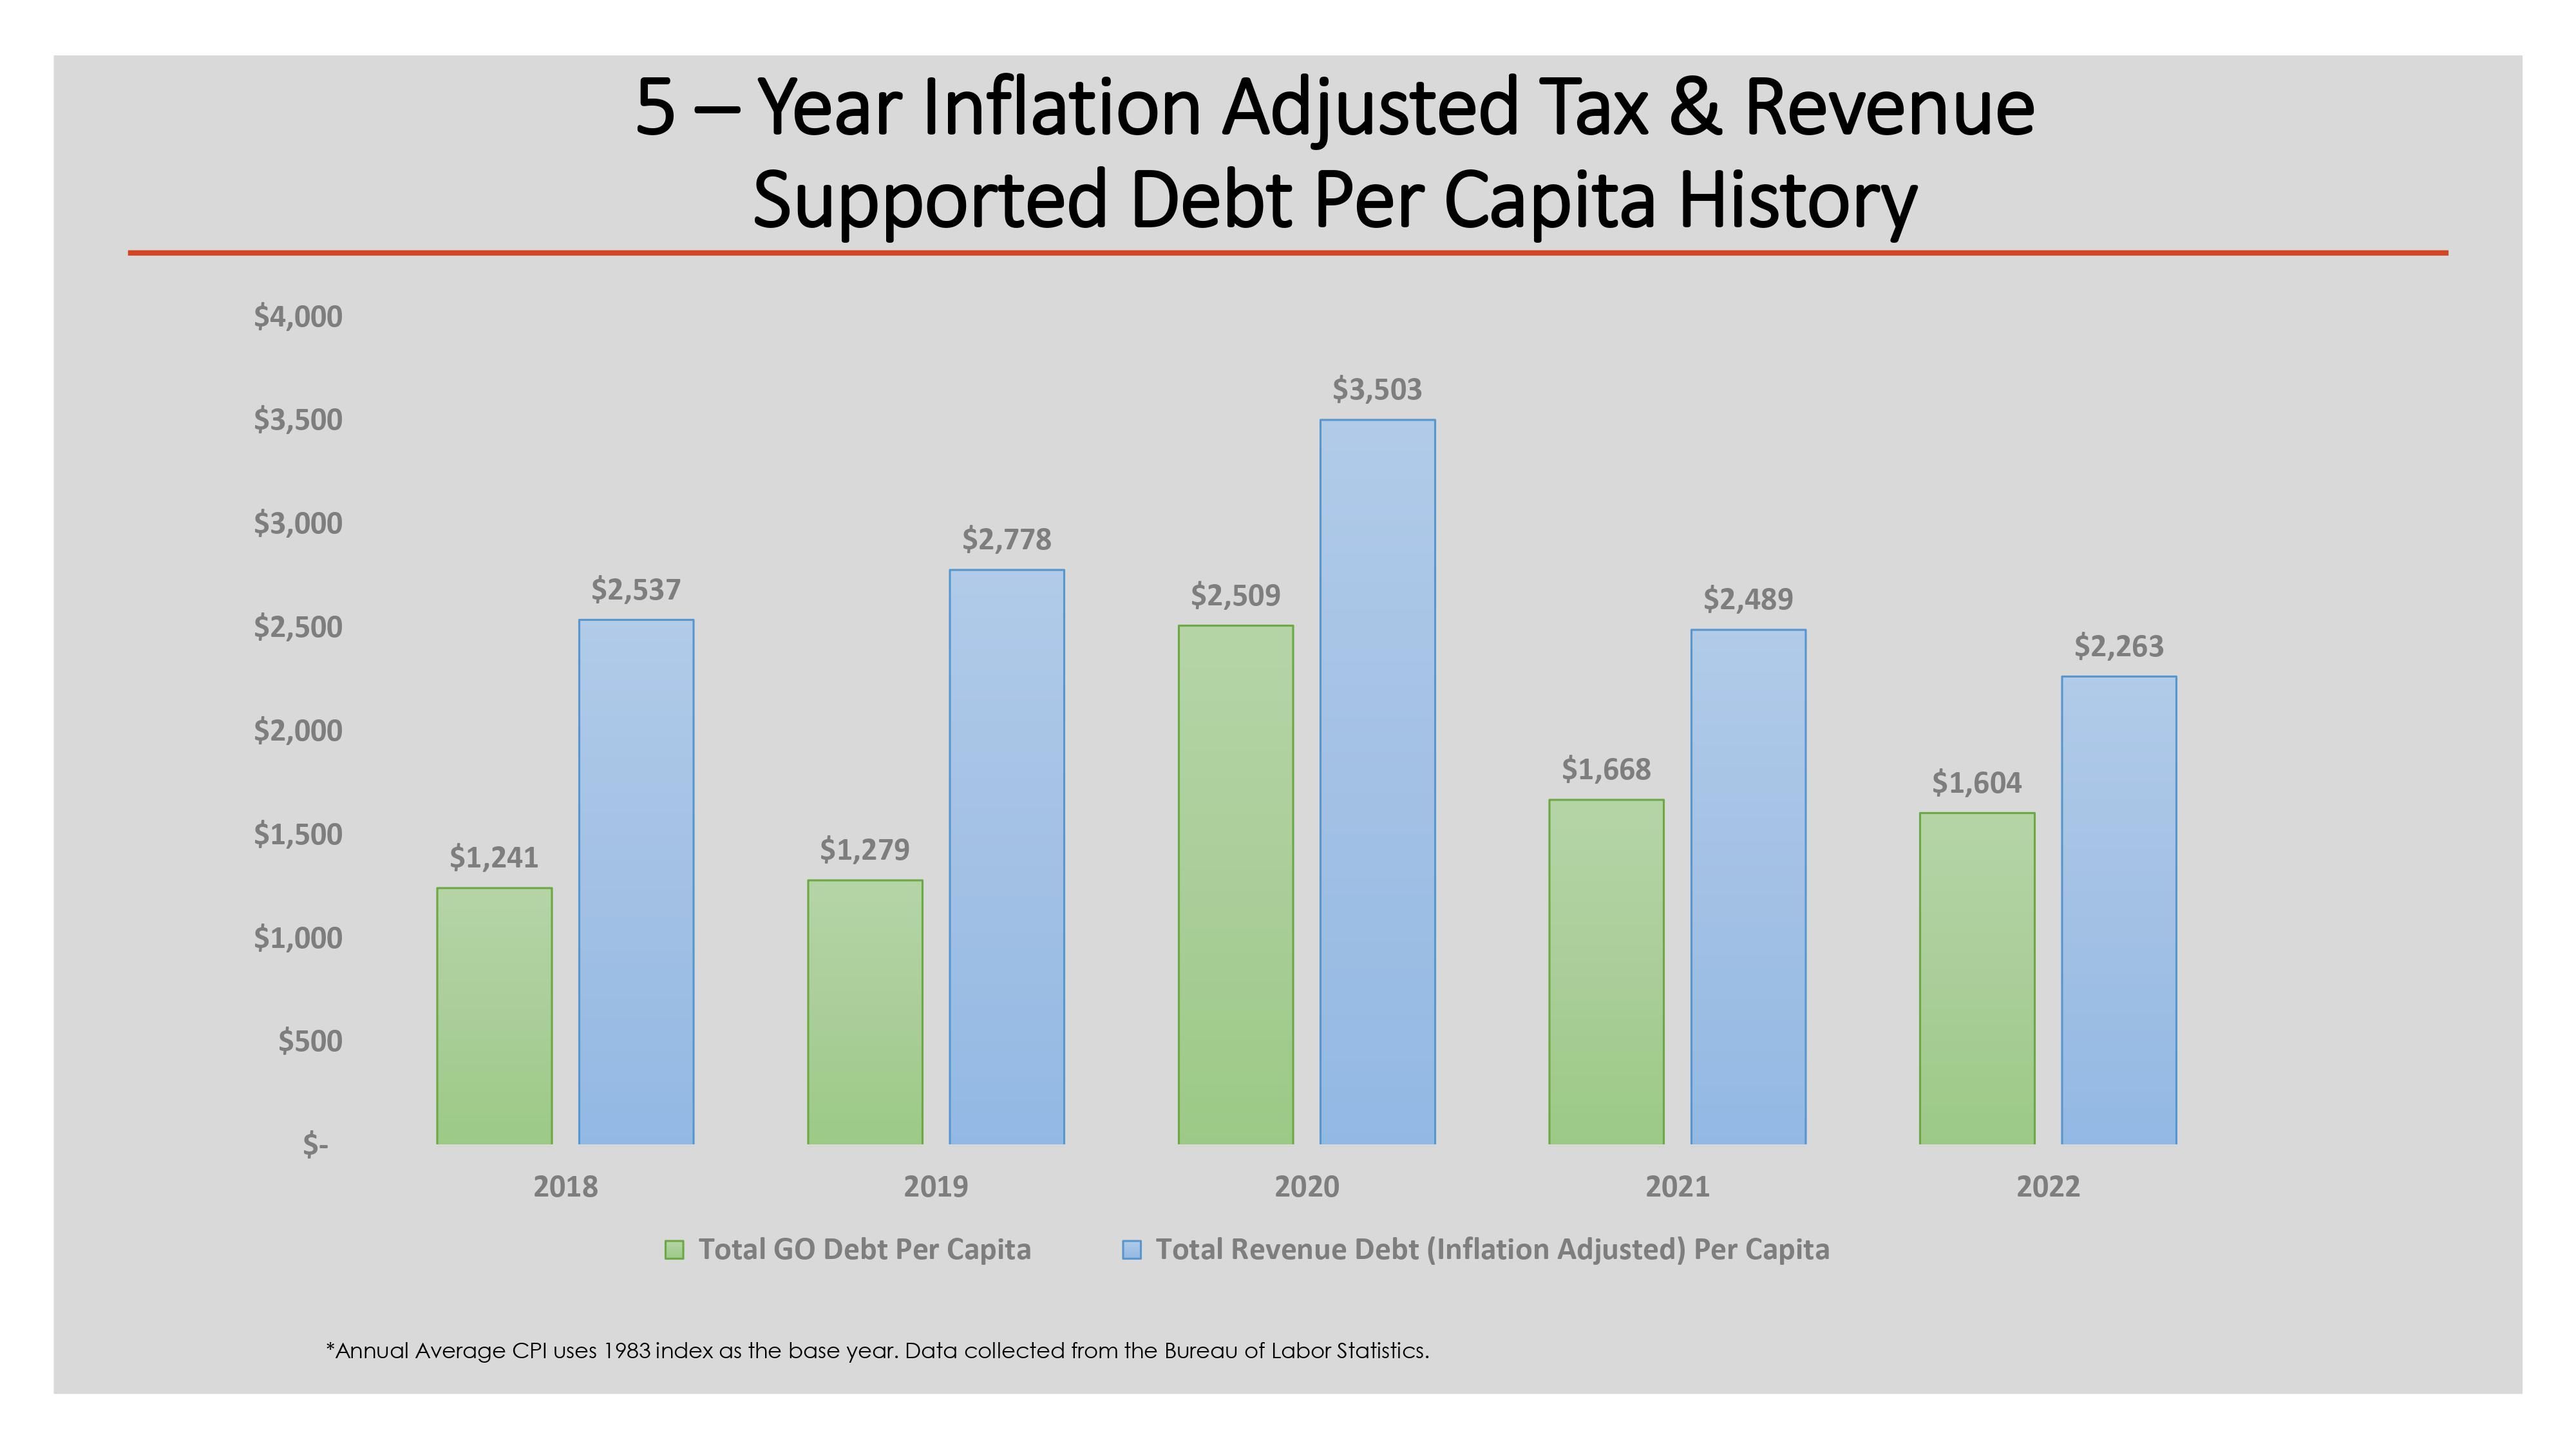 5 Year Inflation Adjusted Tax Revenue Supported Debt Per Capita History 2022